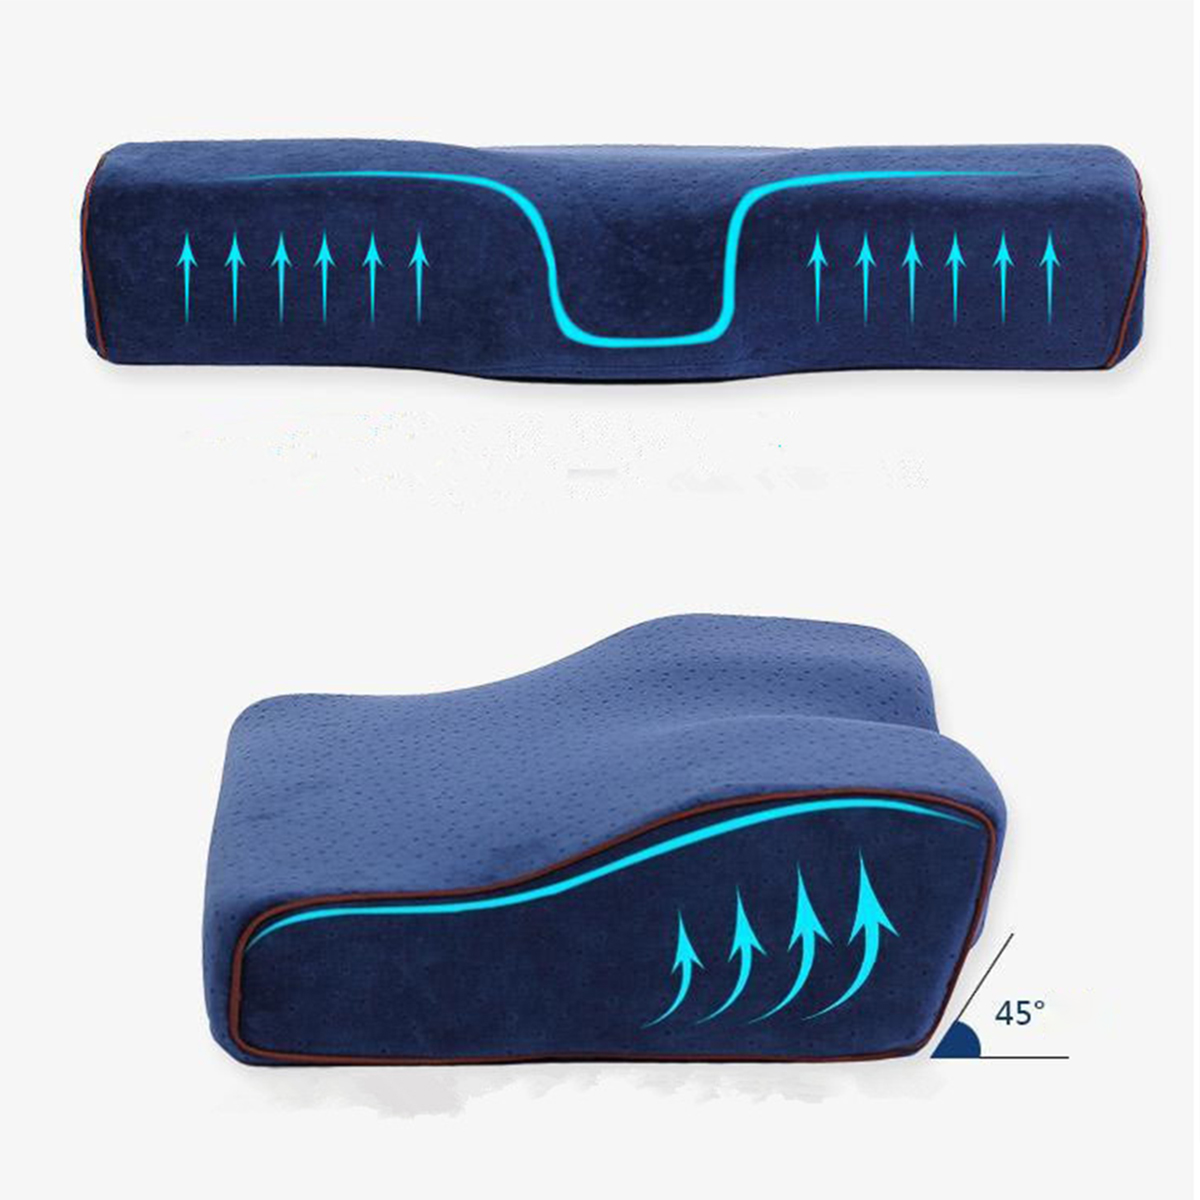 Professional-Slow-Rebound-Memory-Pillow-Outdoor-Travelling-Hiking-Office-Home-Relieve-Fatigue-Extens-1442883-4